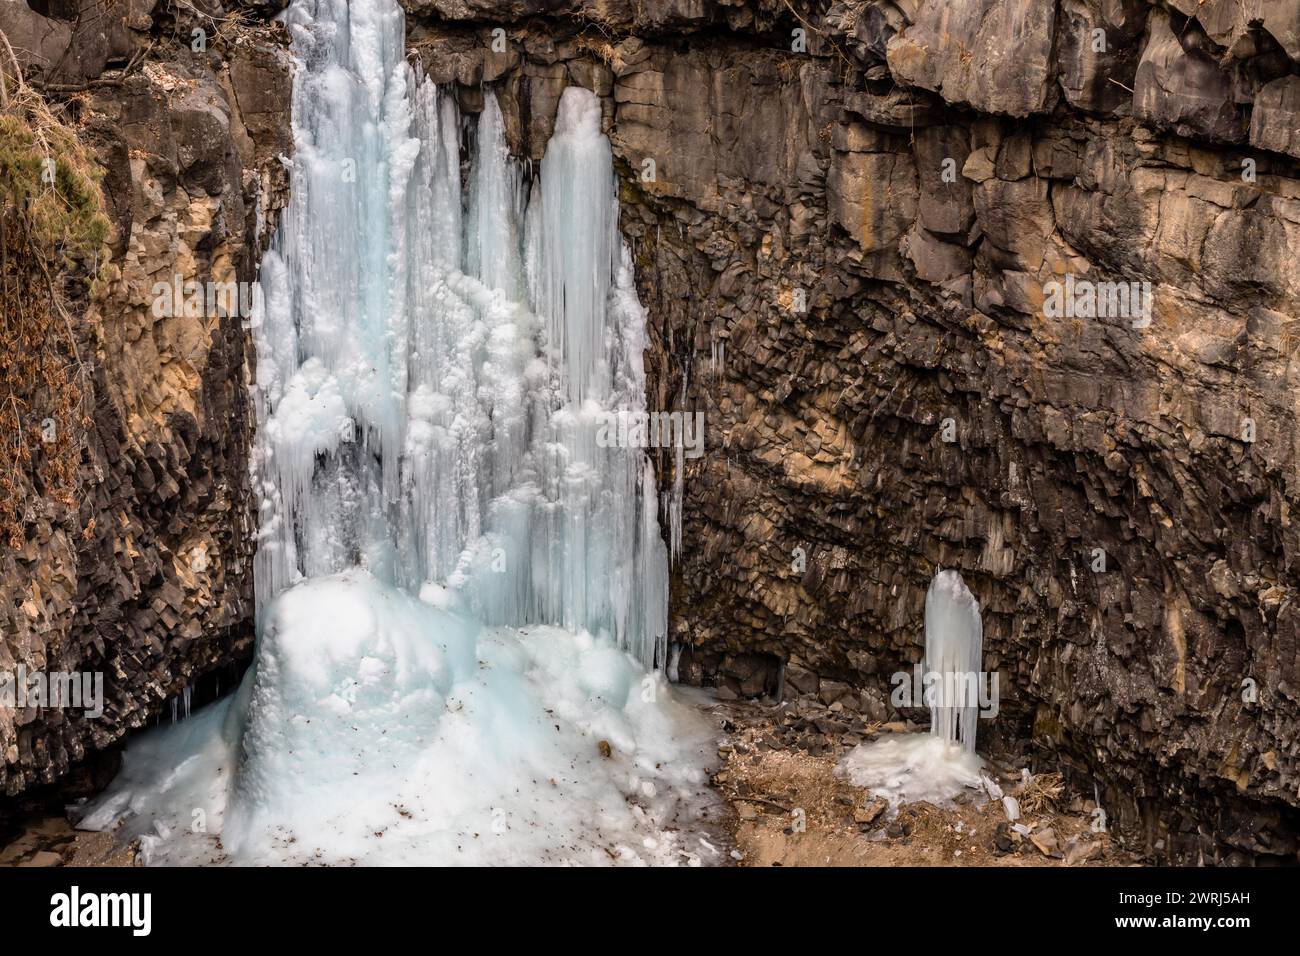 Looking down on frozen waterfall in deep crater located in Gyeonggi province of South Korea Stock Photo